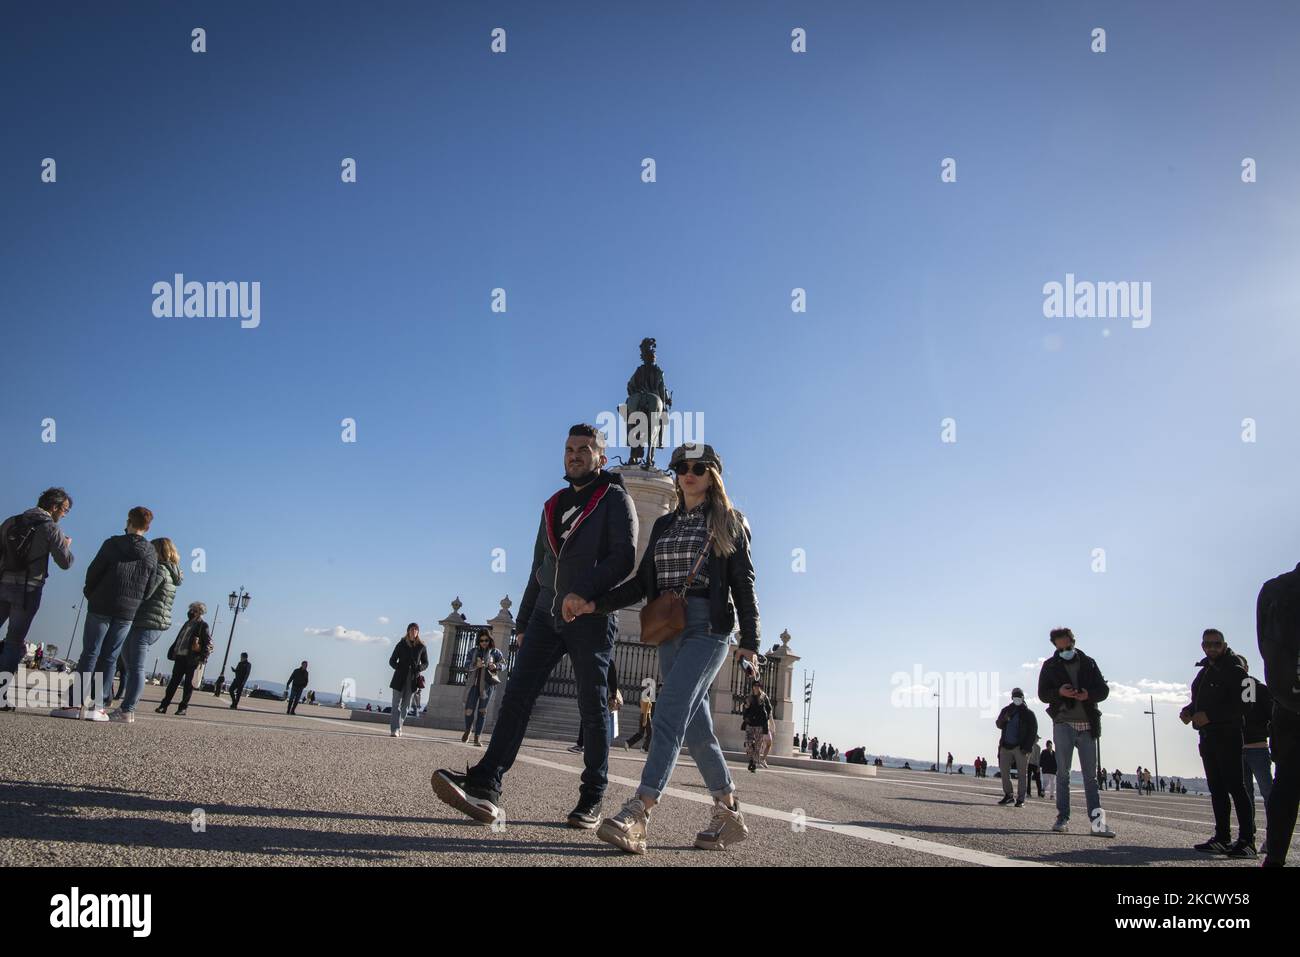 People take walks near Praça de Comercio, Lisbon. November 26, 2021. Prime Minister António Costa said that the omicron variant of COVID-19 has not yet been detected in Portugal, but that if it is, 'appropriate measures' will be taken. (Photo by Jorge Mantilla/NurPhoto) Stock Photo